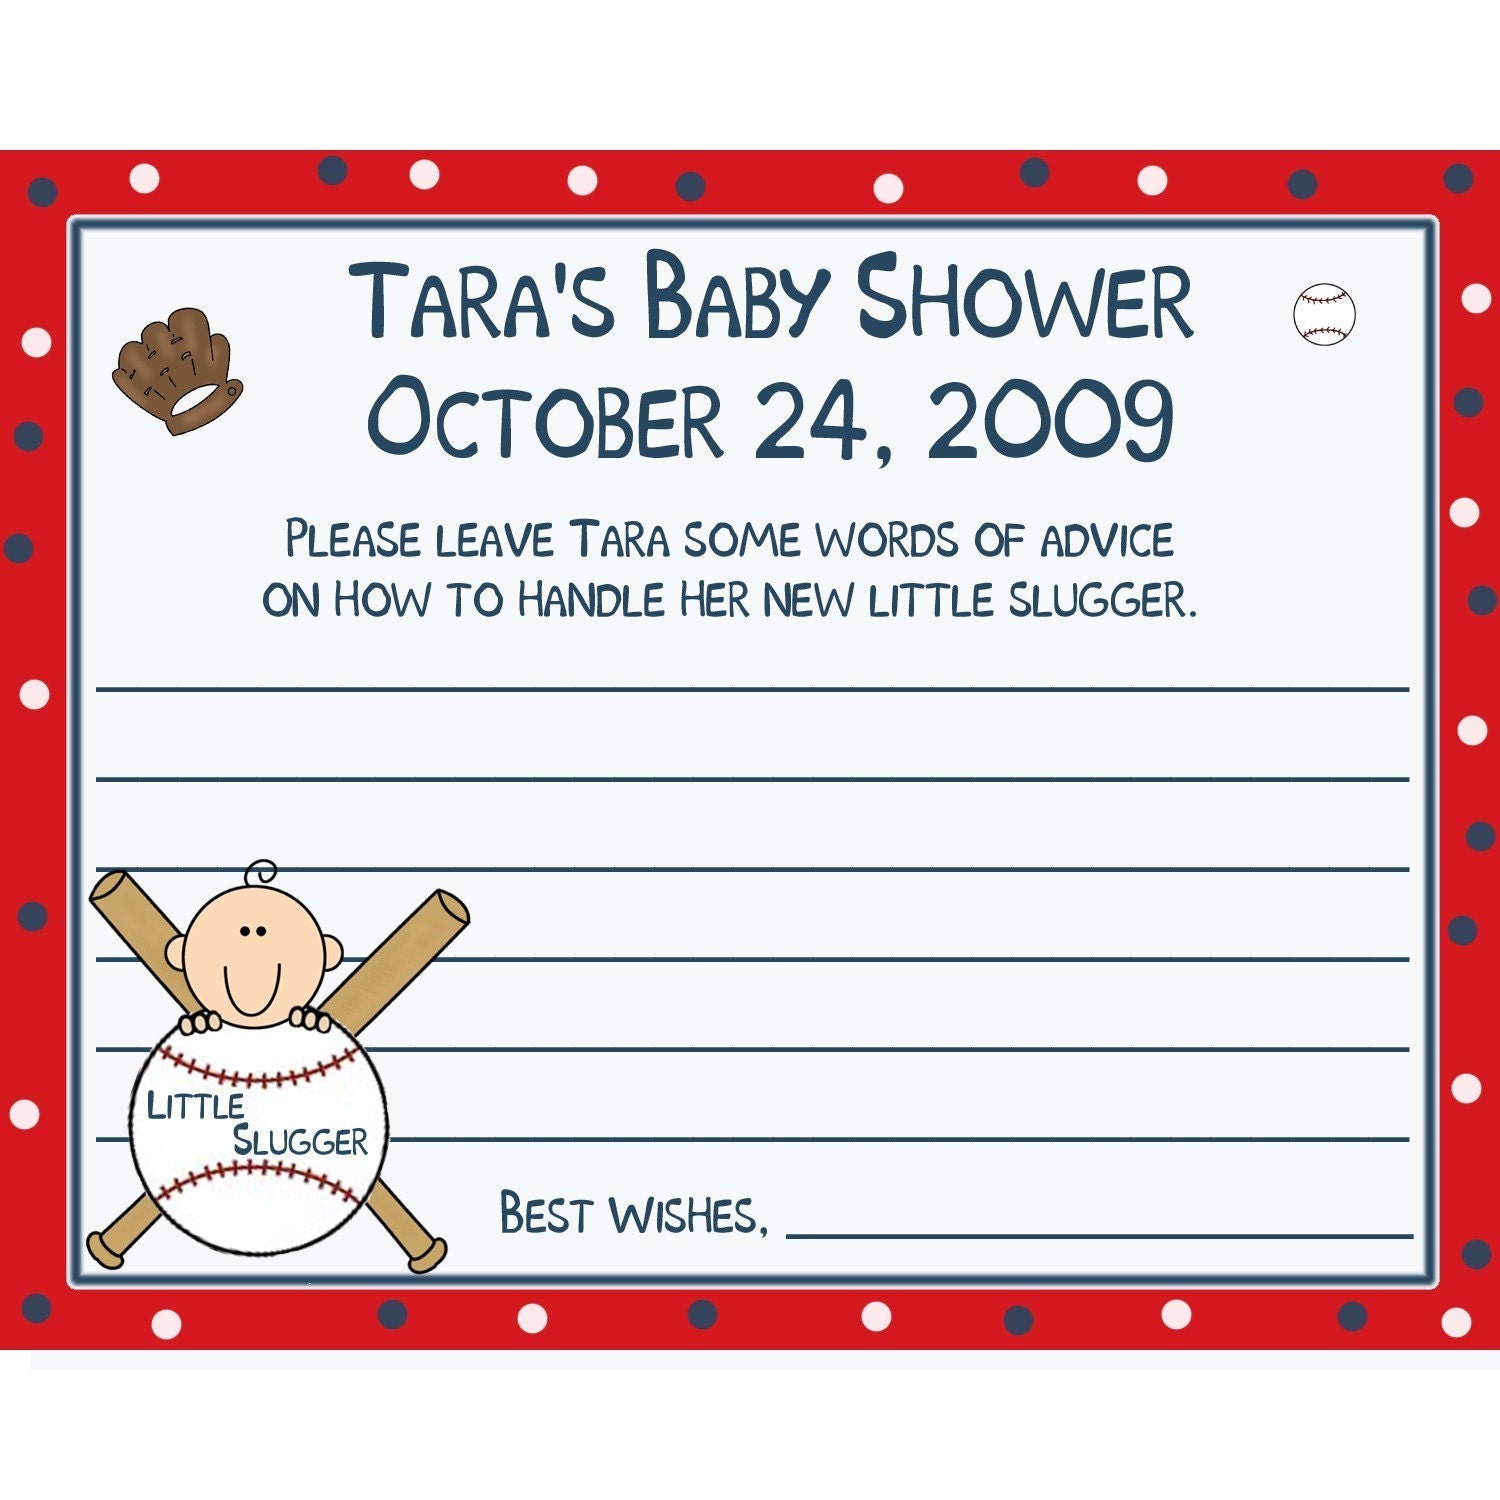 Advice Cards For Baby Shower. 24 Baby Shower Advice Cards in